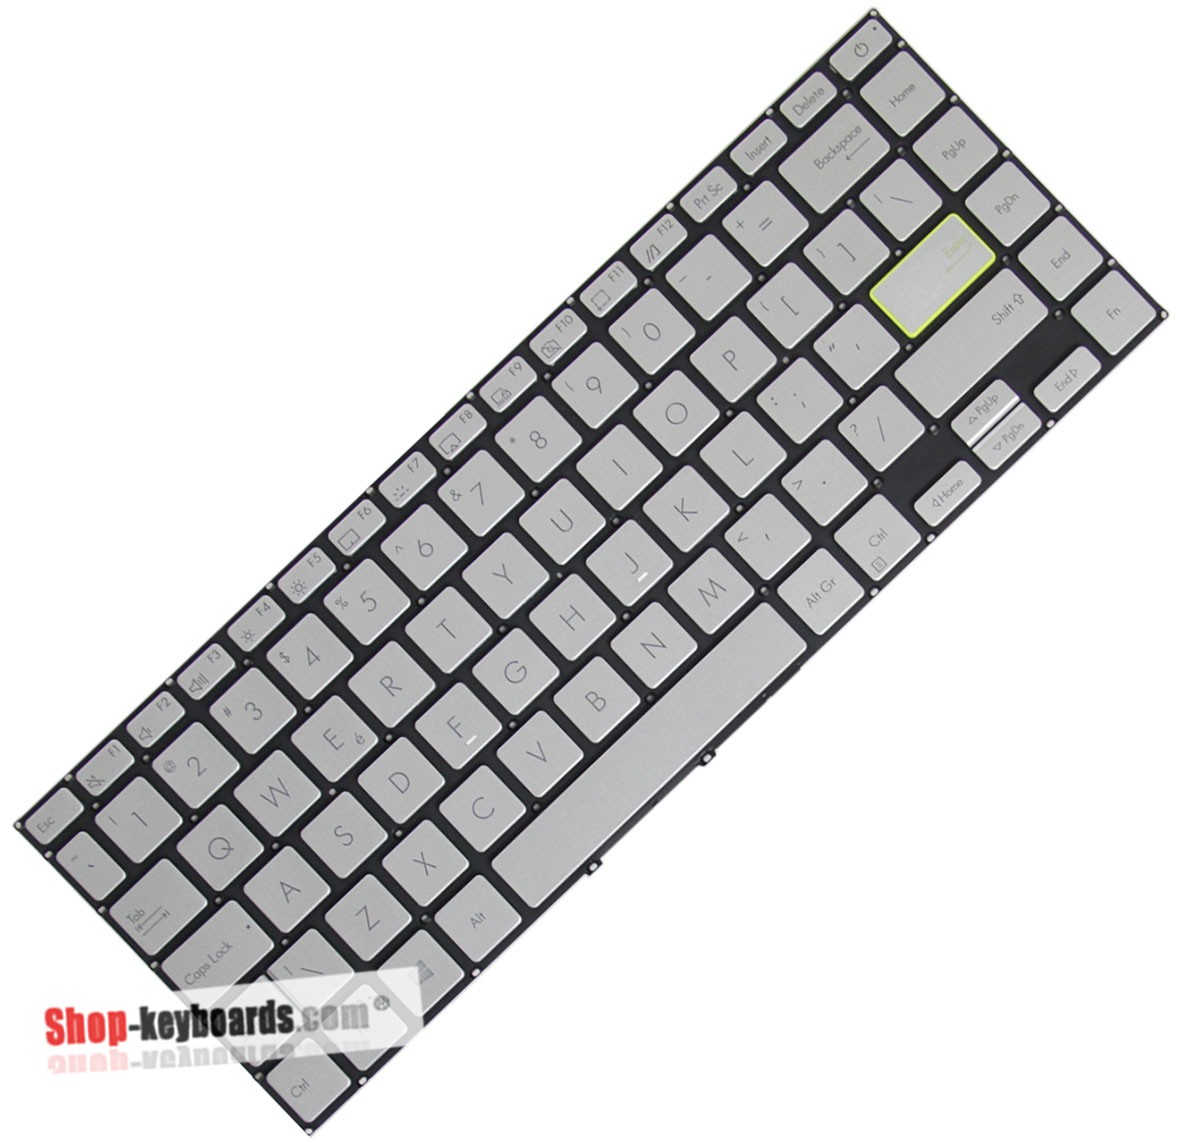 Asus M413IA Keyboard replacement